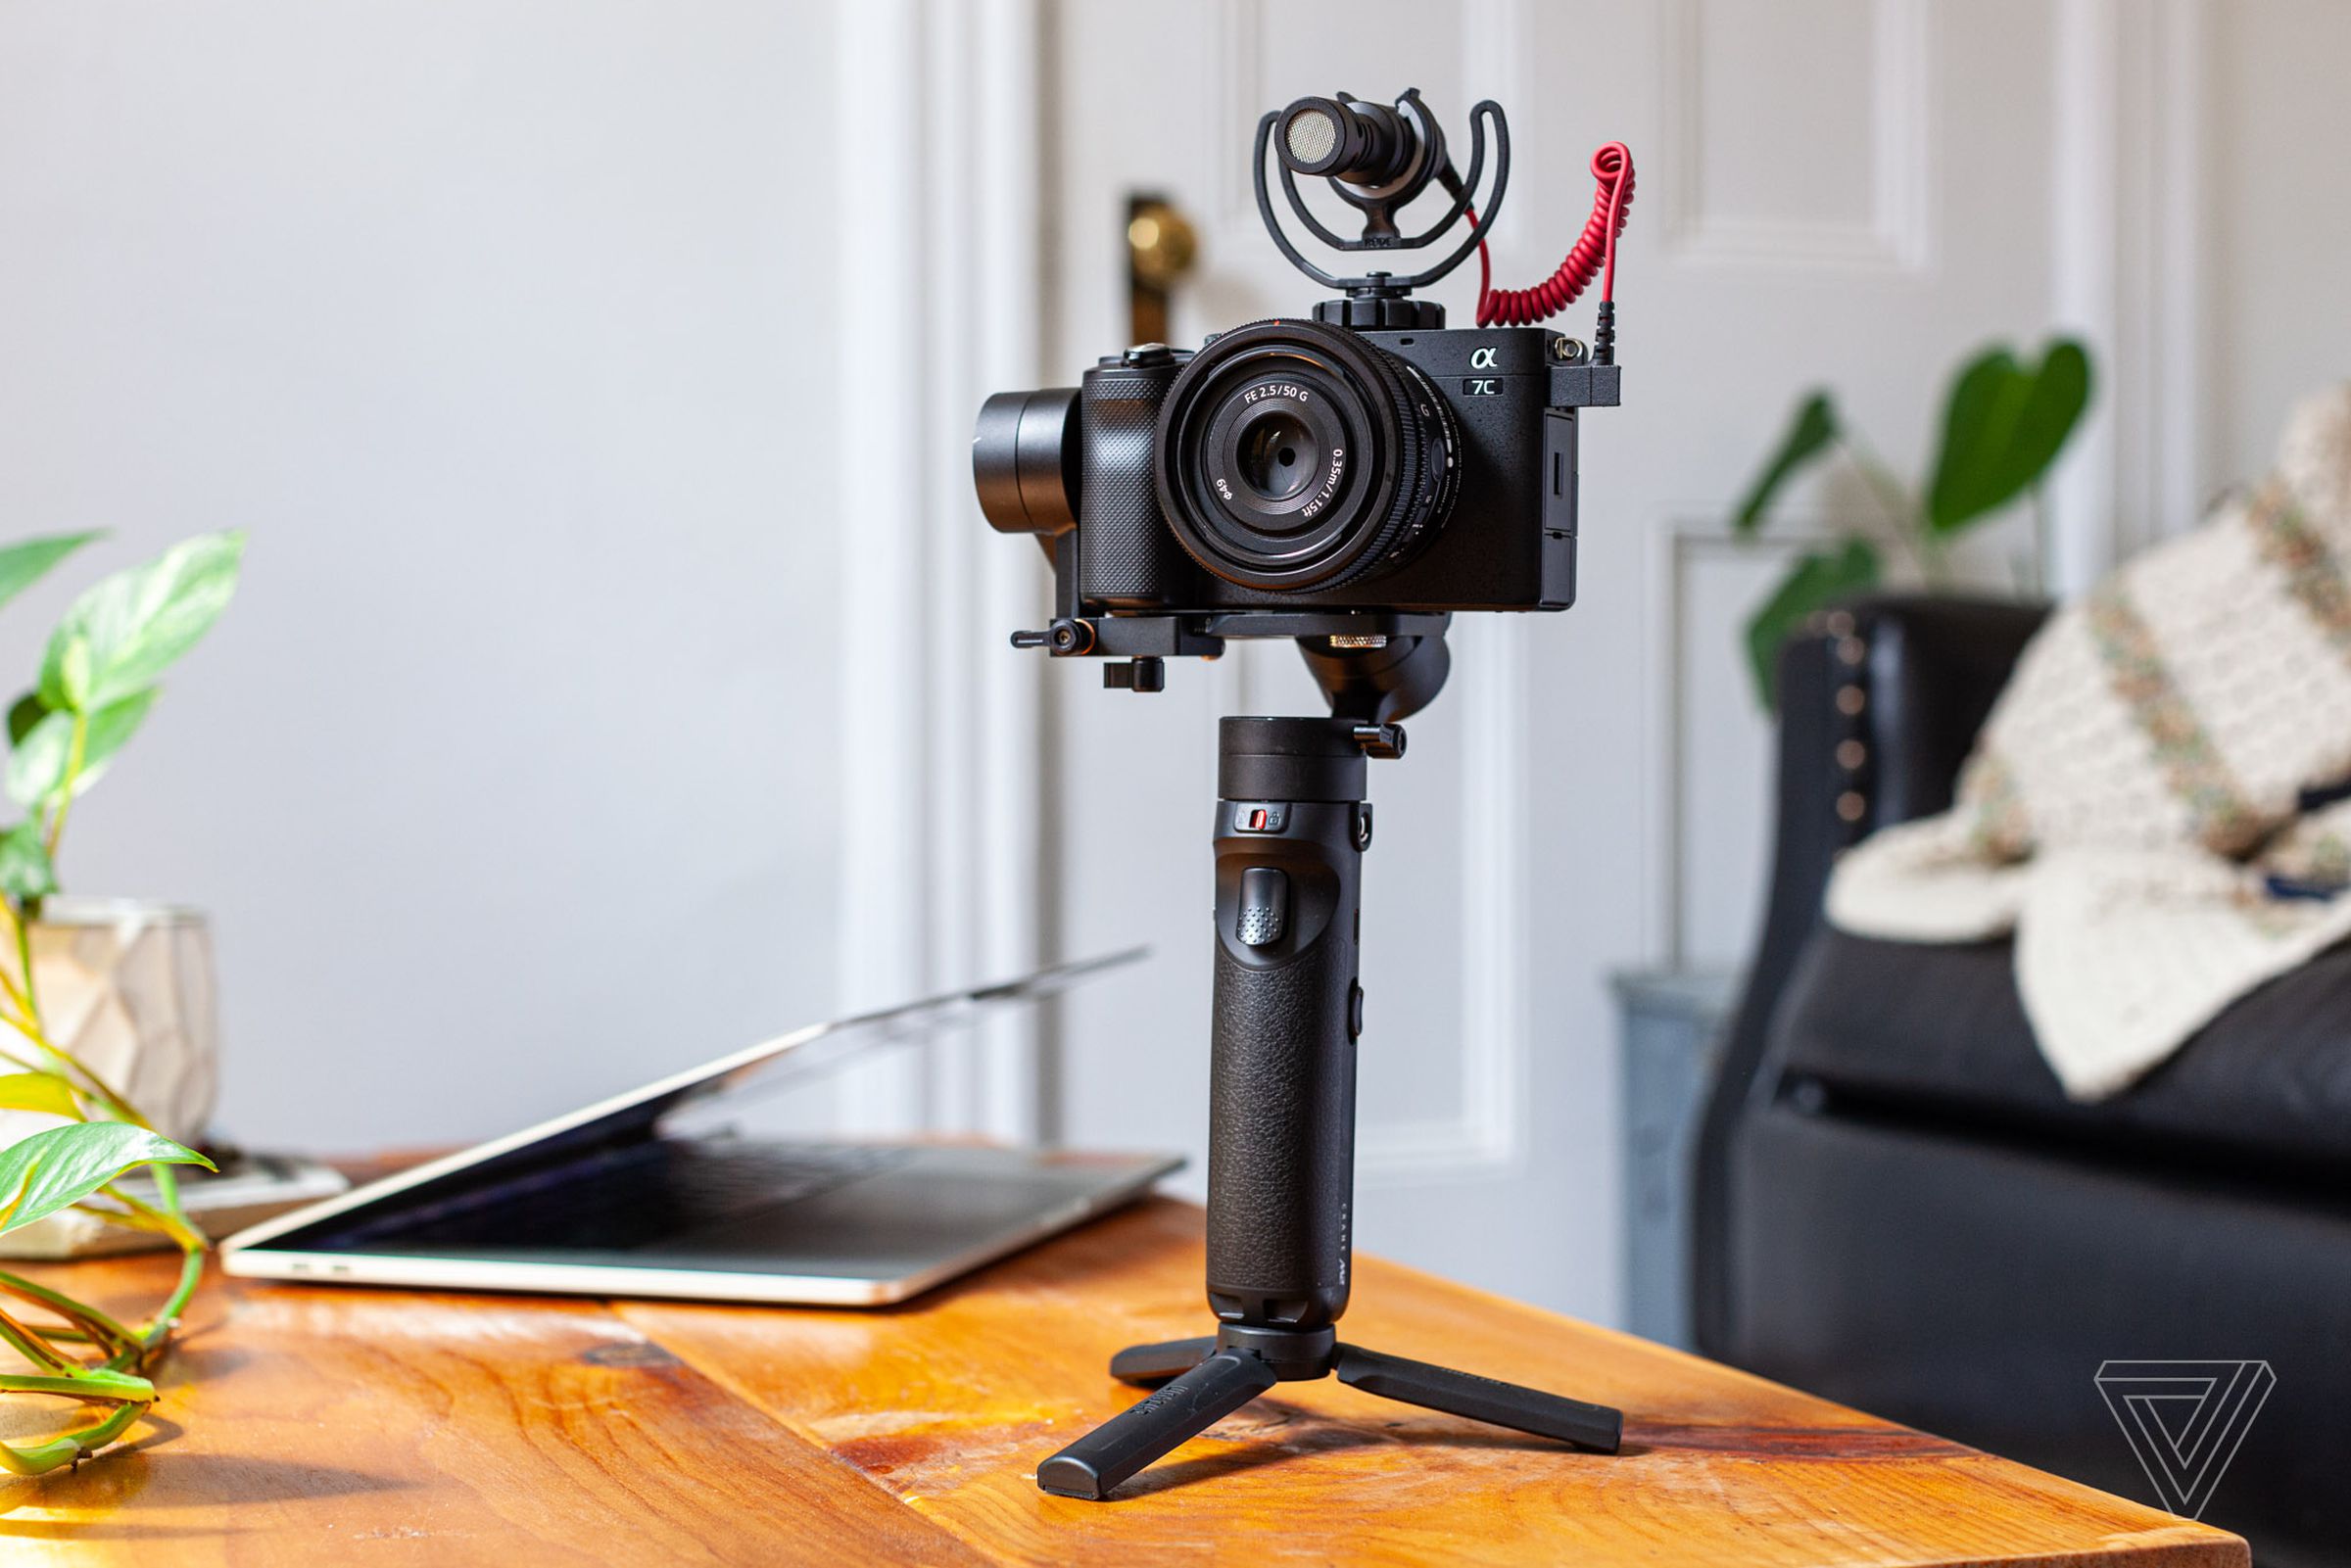 The Zhiyun Crane M2 is rated for cameras up to 720g (1.58lb).